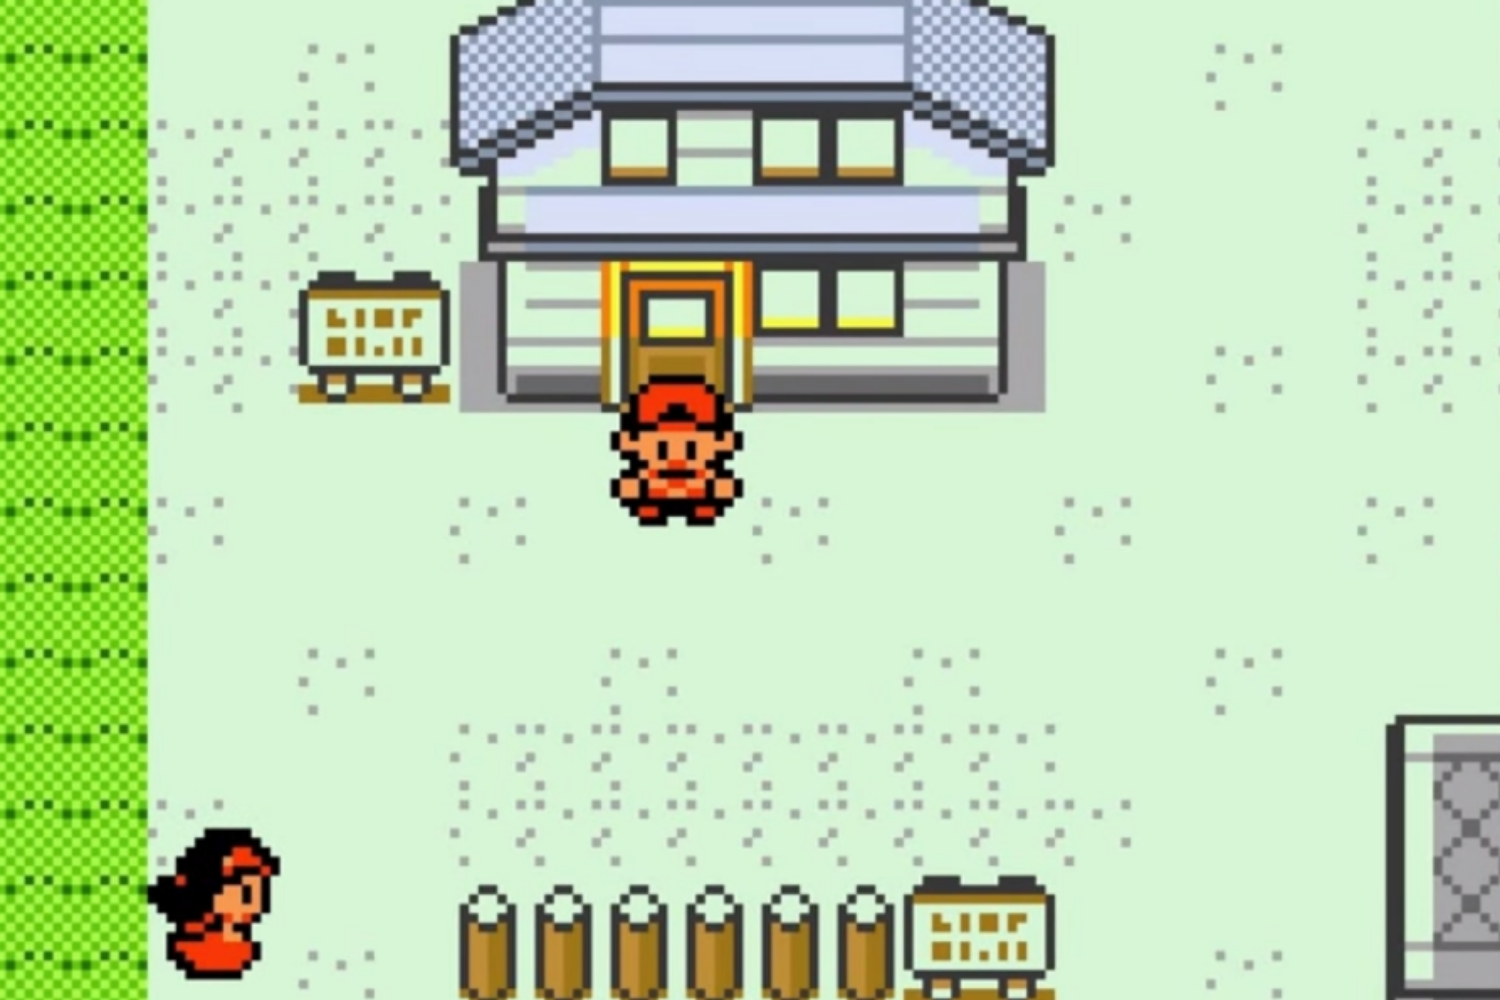 How To Get Eevee In Pokemon Gold & Silver